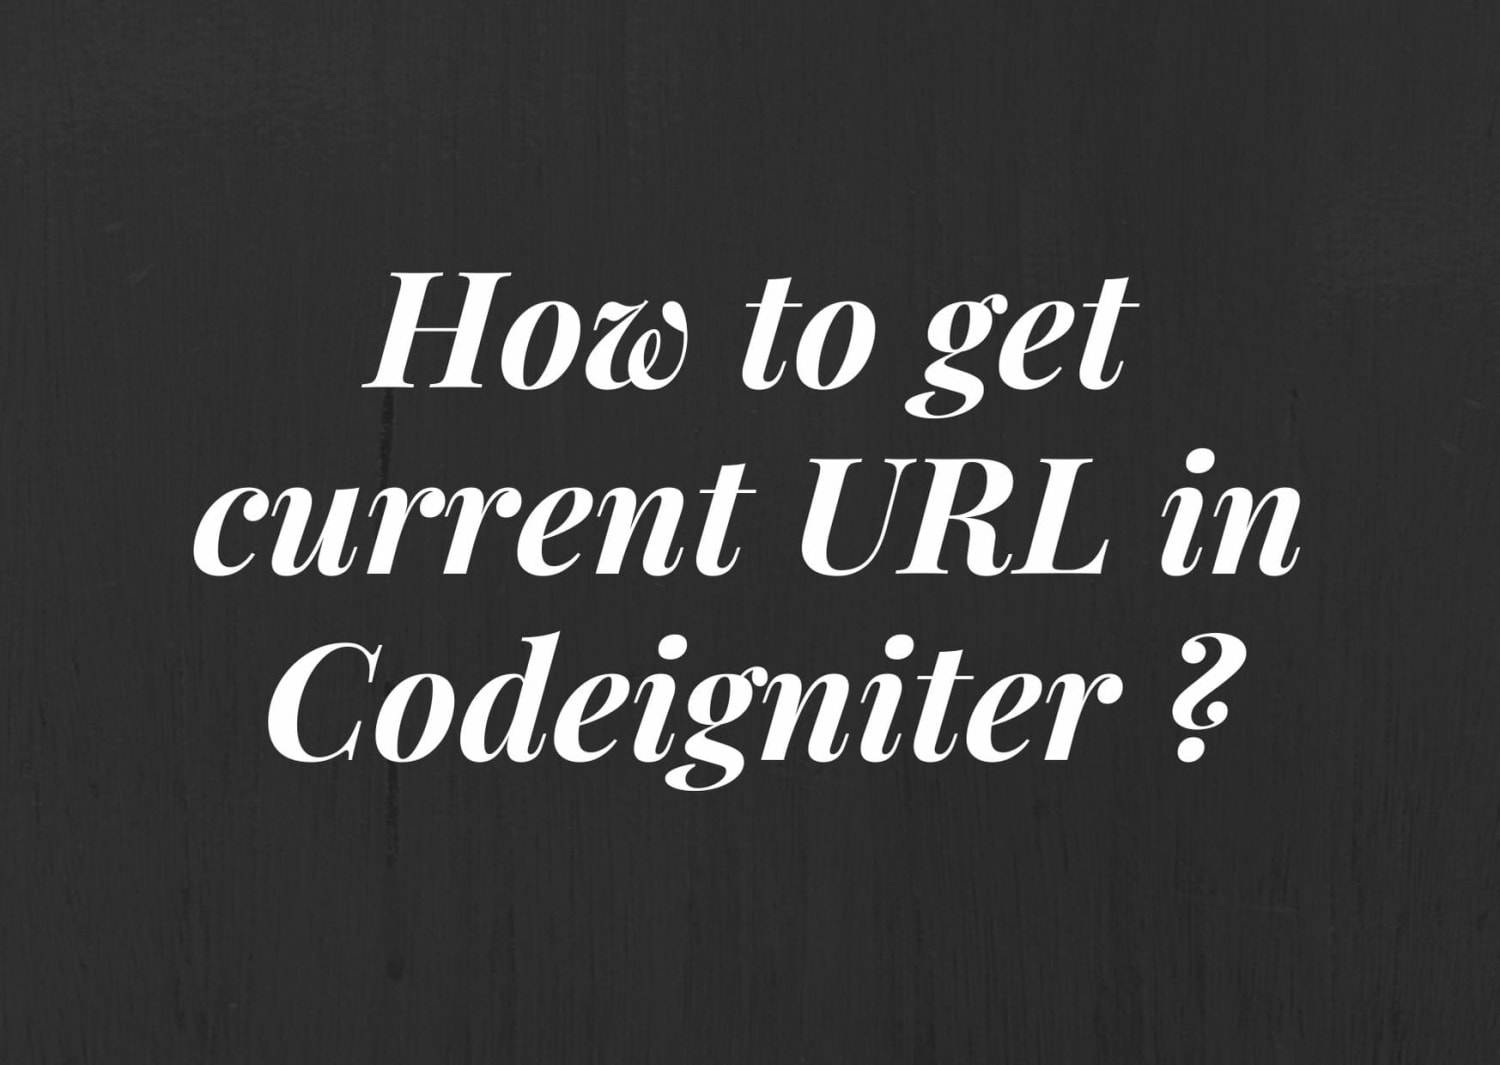 How to get current URL in Codeigniter?